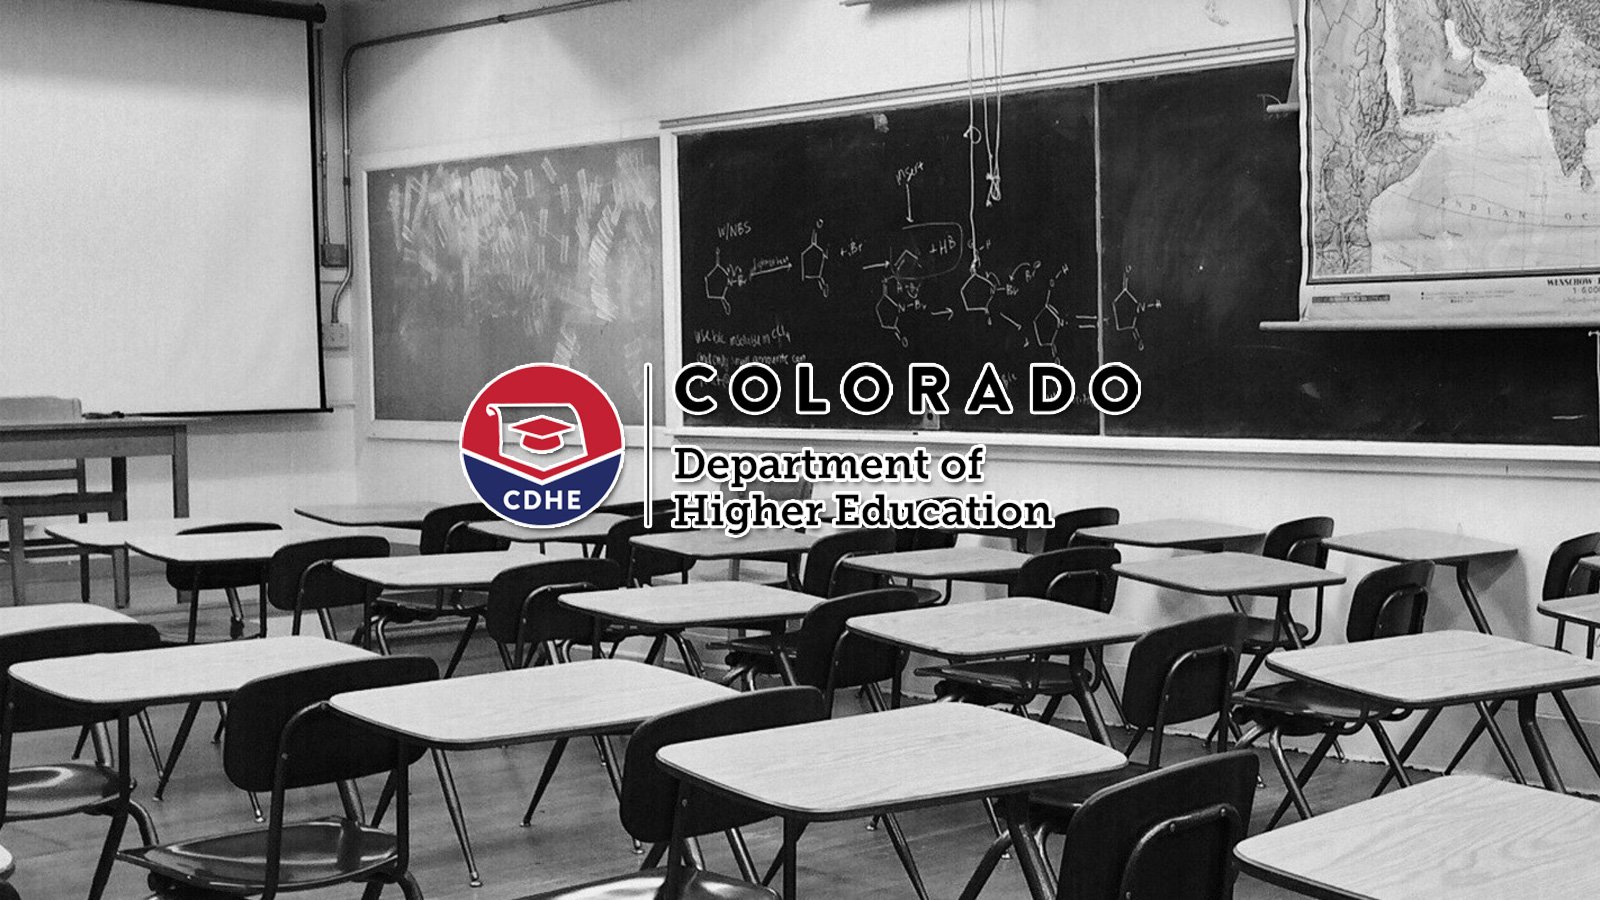 Colorado Department of Higher Education (CDHE) discloses data breach after ransomware attack